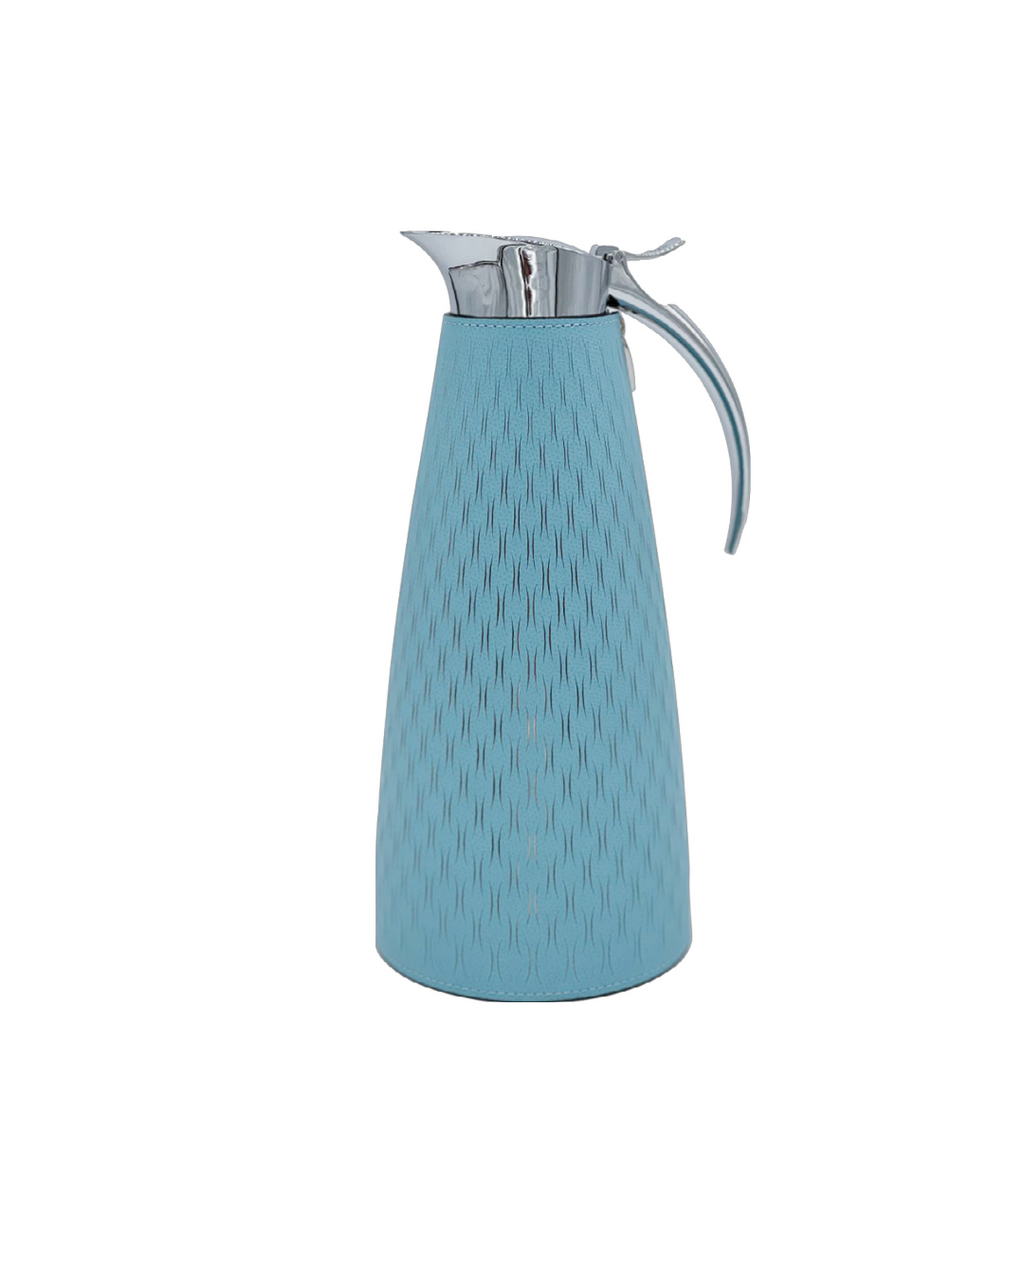 STYLE THERMAL CARAFE